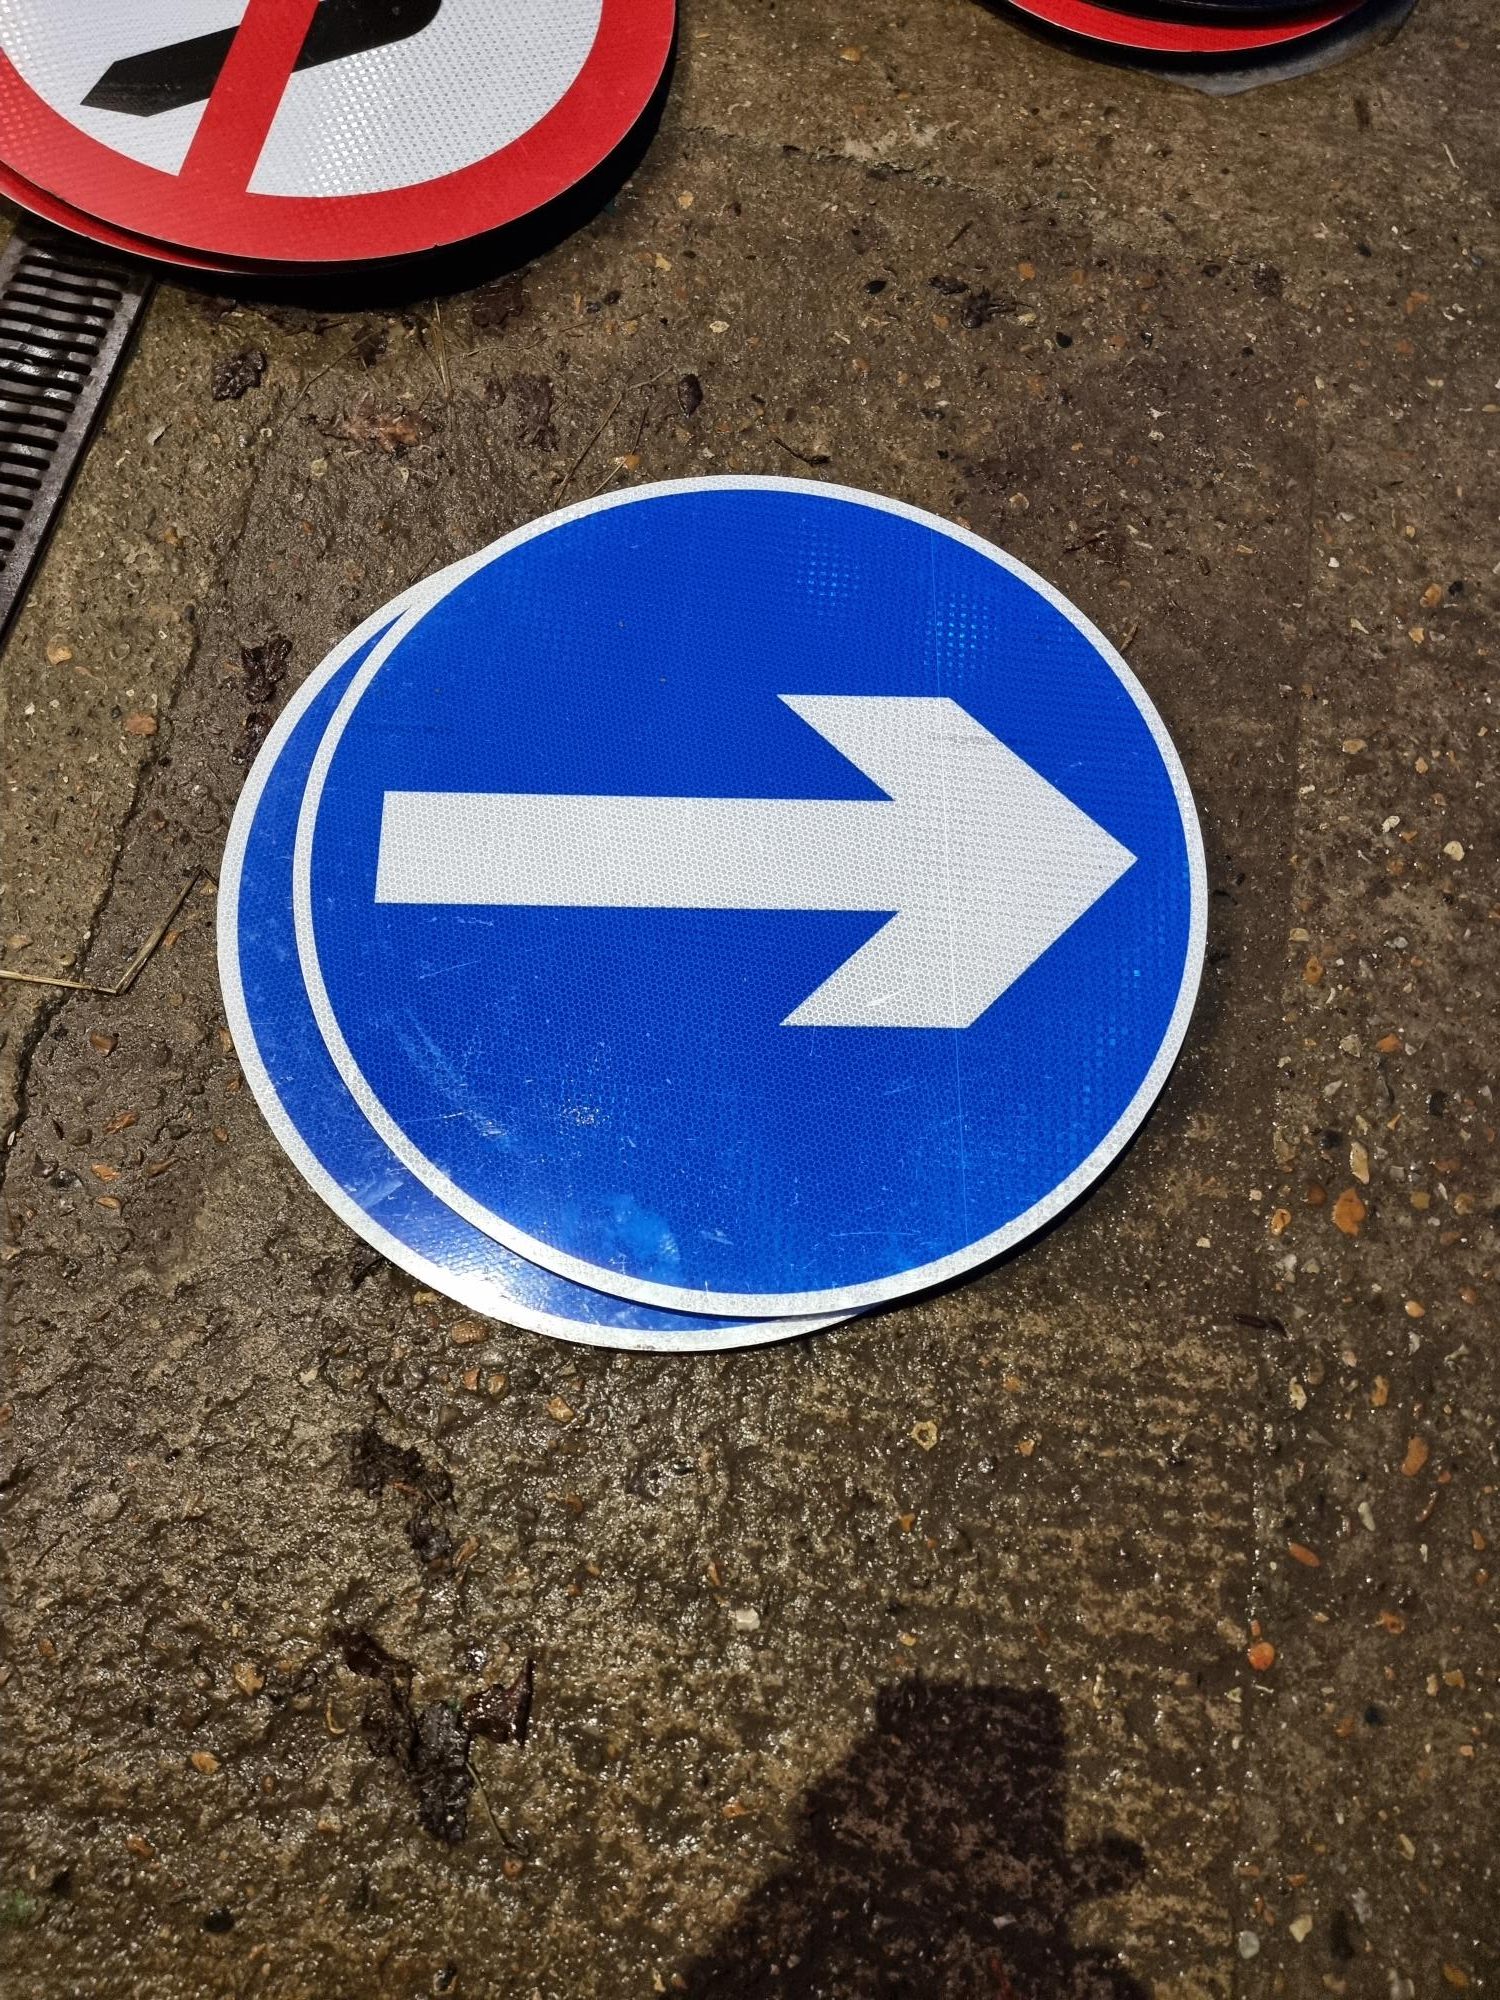 One Way Arrow – Road and Traffic Signs